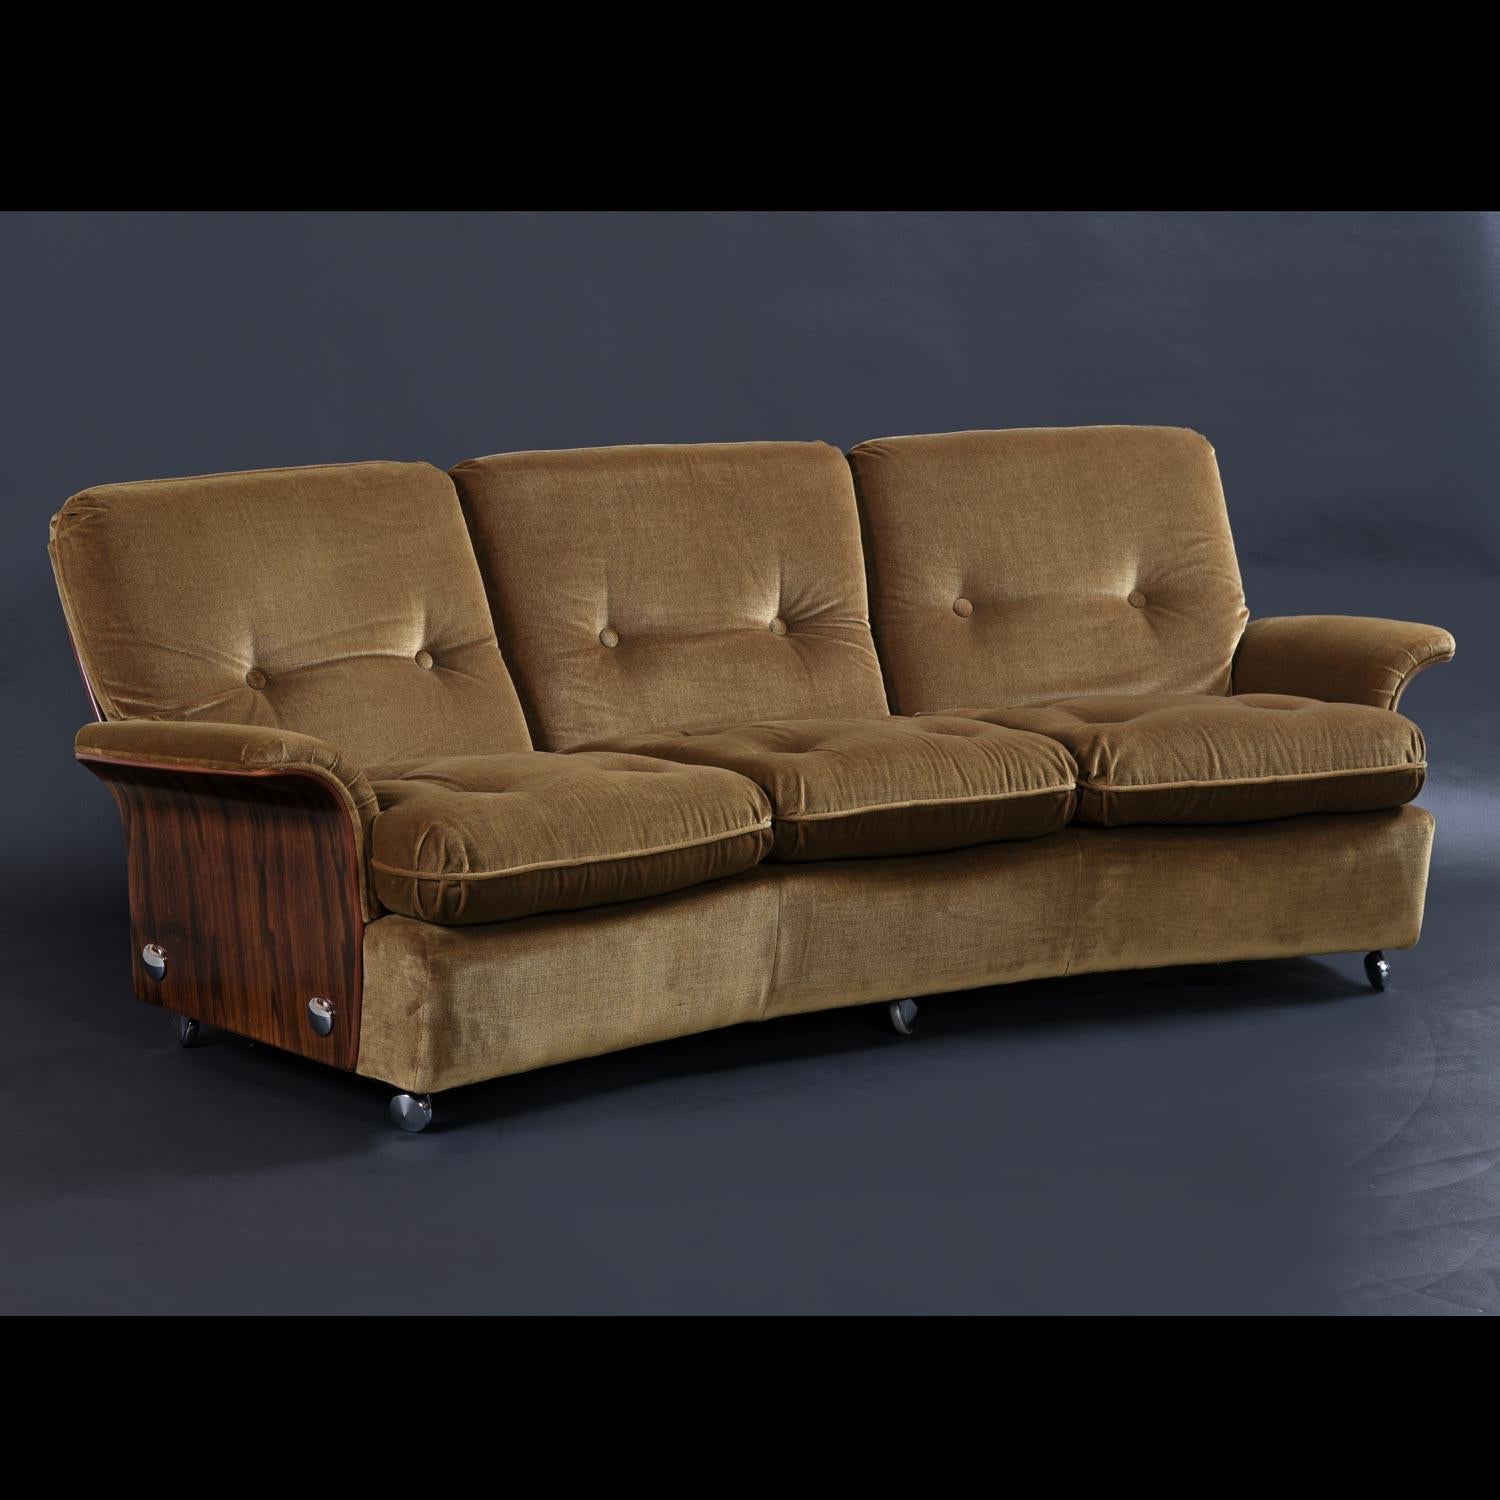 English Tulip Group Sofa in Rosewood by K M Wilkins for G-Plan of England For Sale